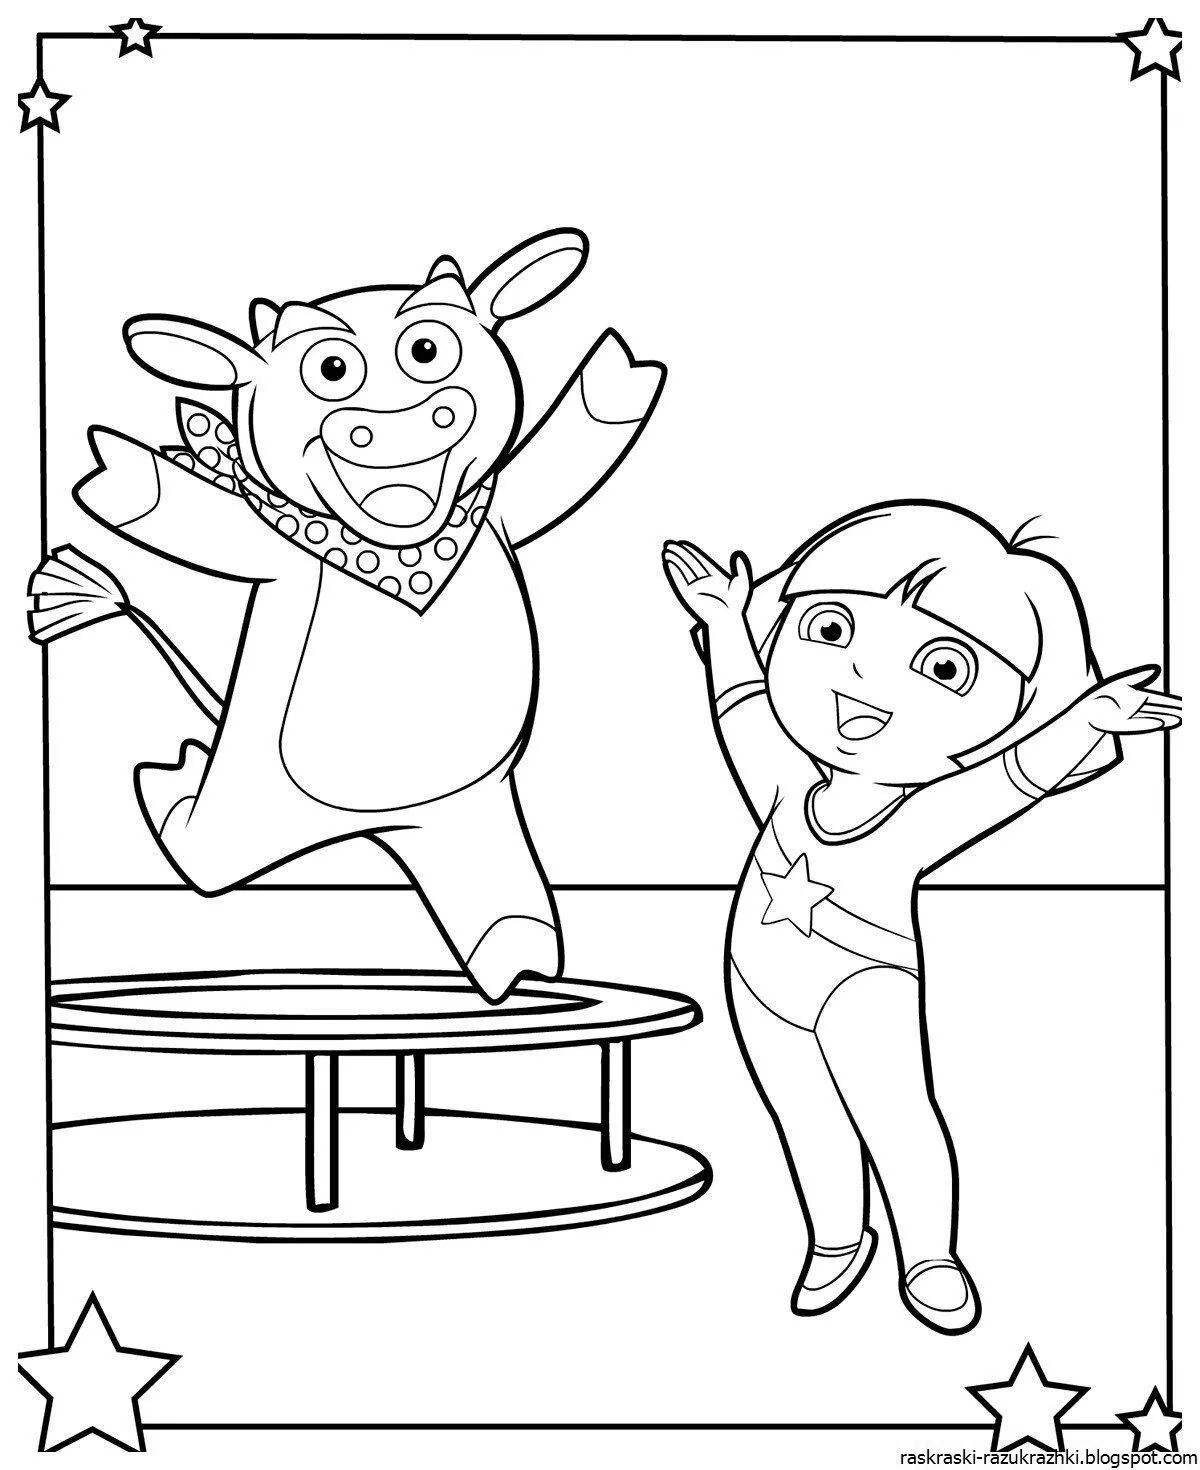 Entertaining exercise coloring book for children